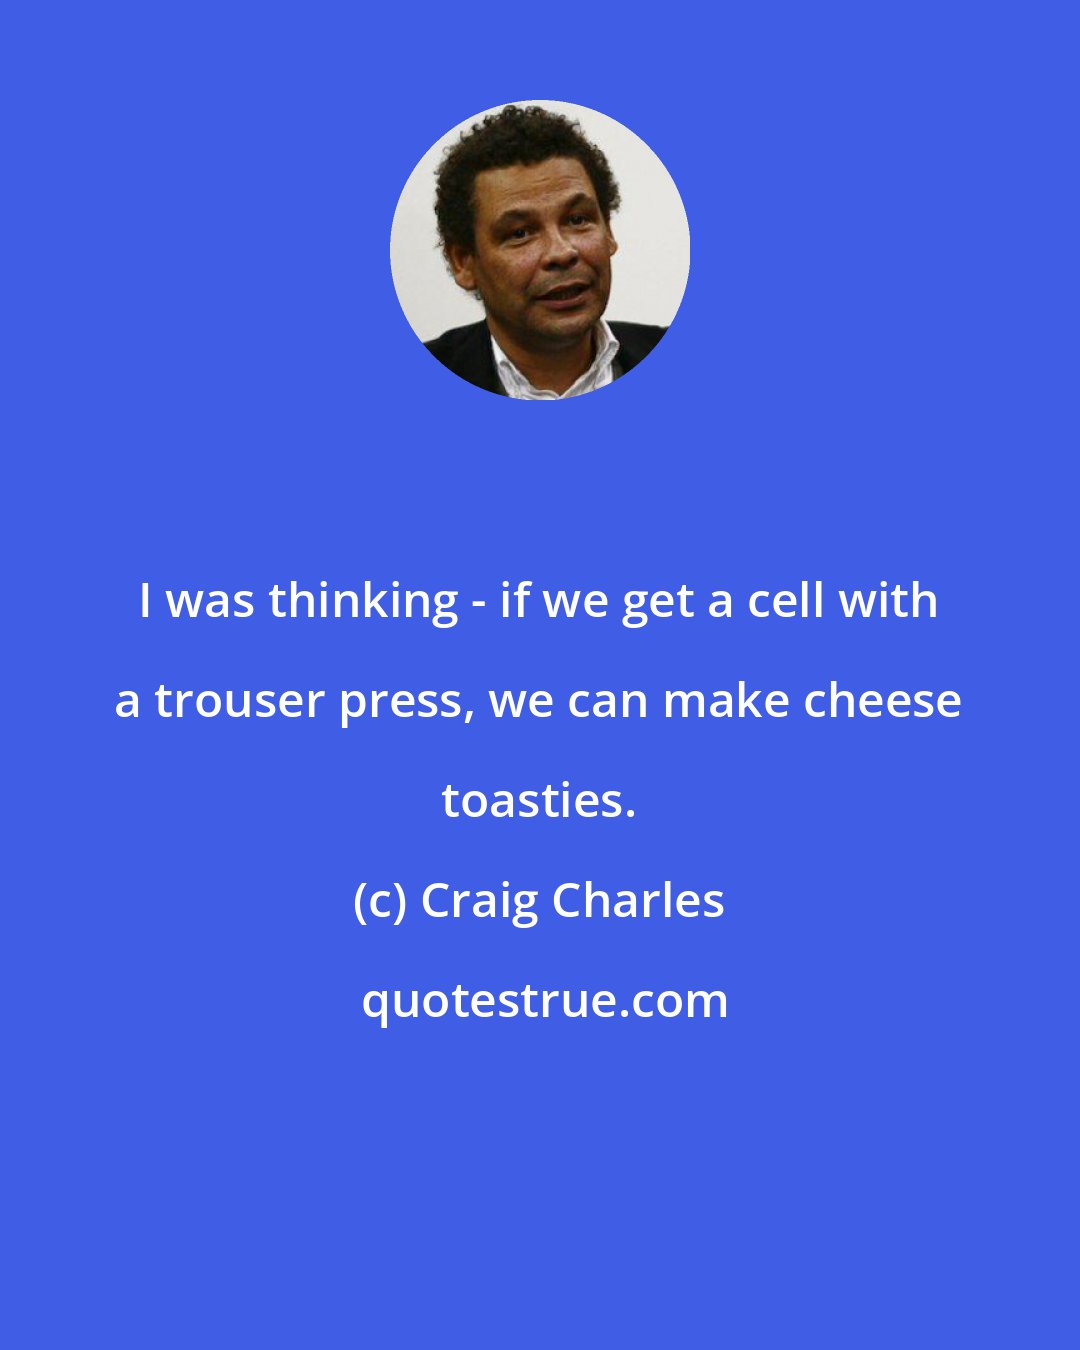 Craig Charles: I was thinking - if we get a cell with a trouser press, we can make cheese toasties.